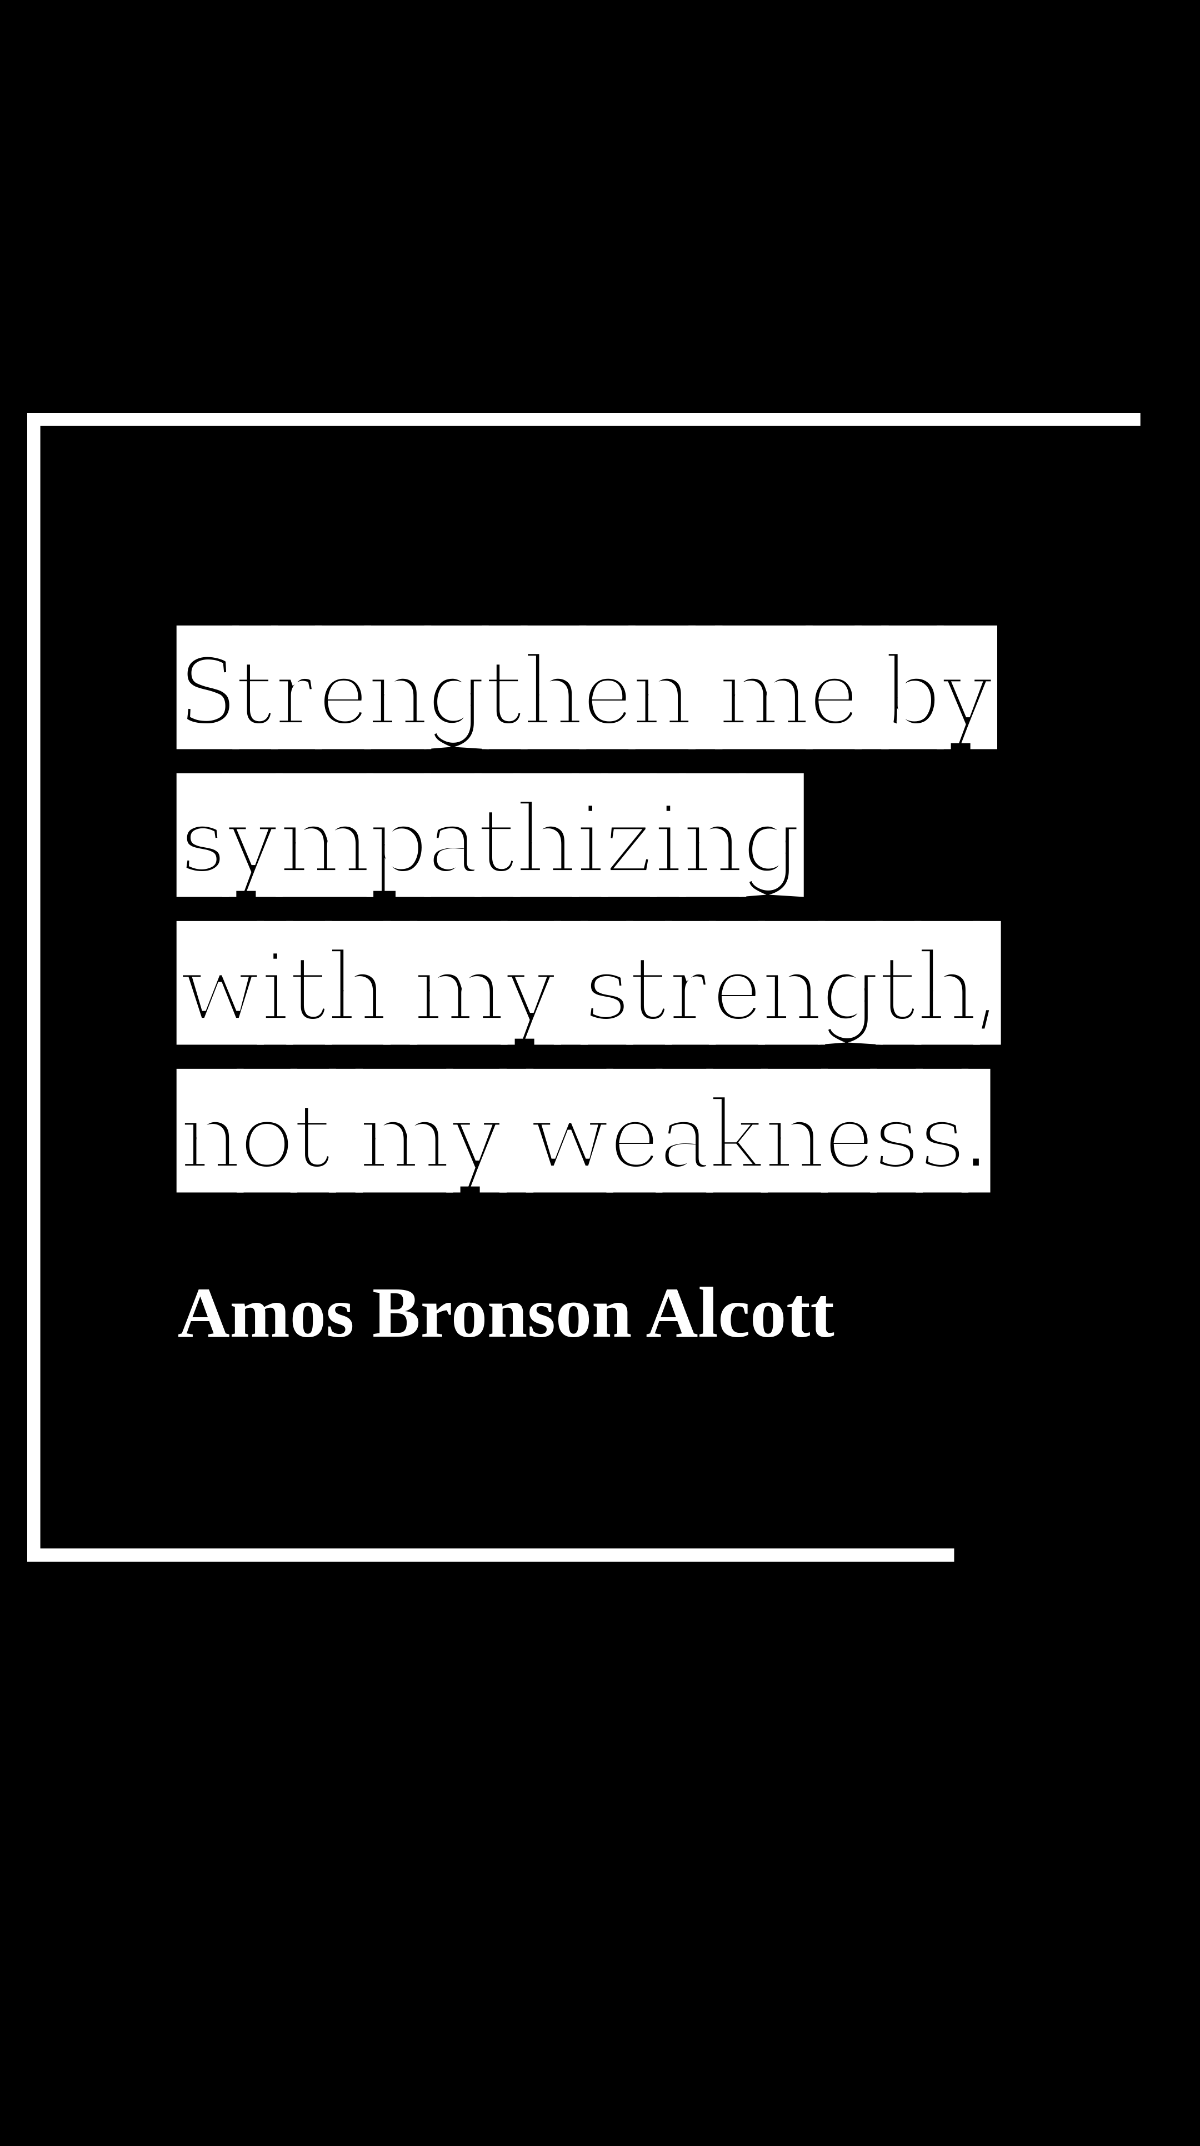 Amos Bronson Alcott - Strengthen me by sympathizing with my strength, not my weakness. Template